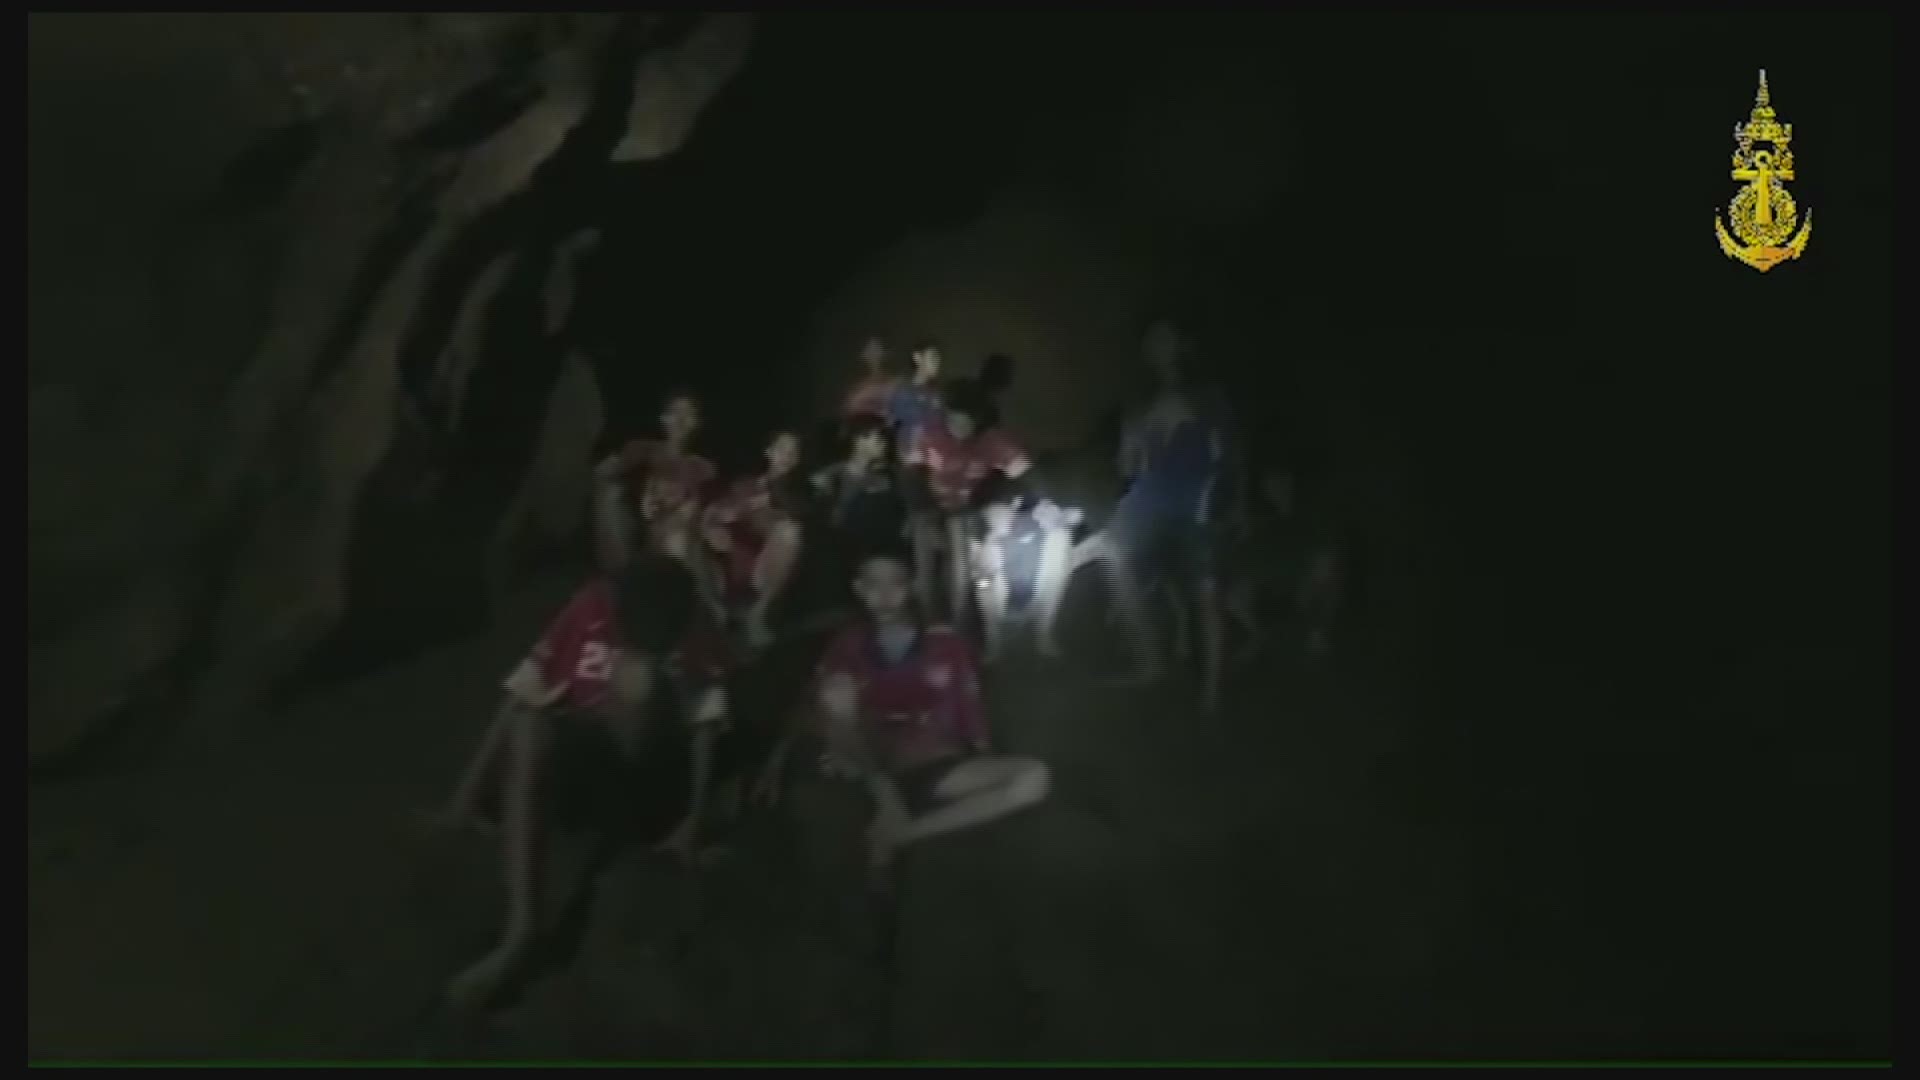 Rescuers found all 12 boys and their soccer coach alive deep inside a partially flooded cave in northern Thailand late Monday, more than a week after they disappeared. (Video: Thai Navy Seal via AP)